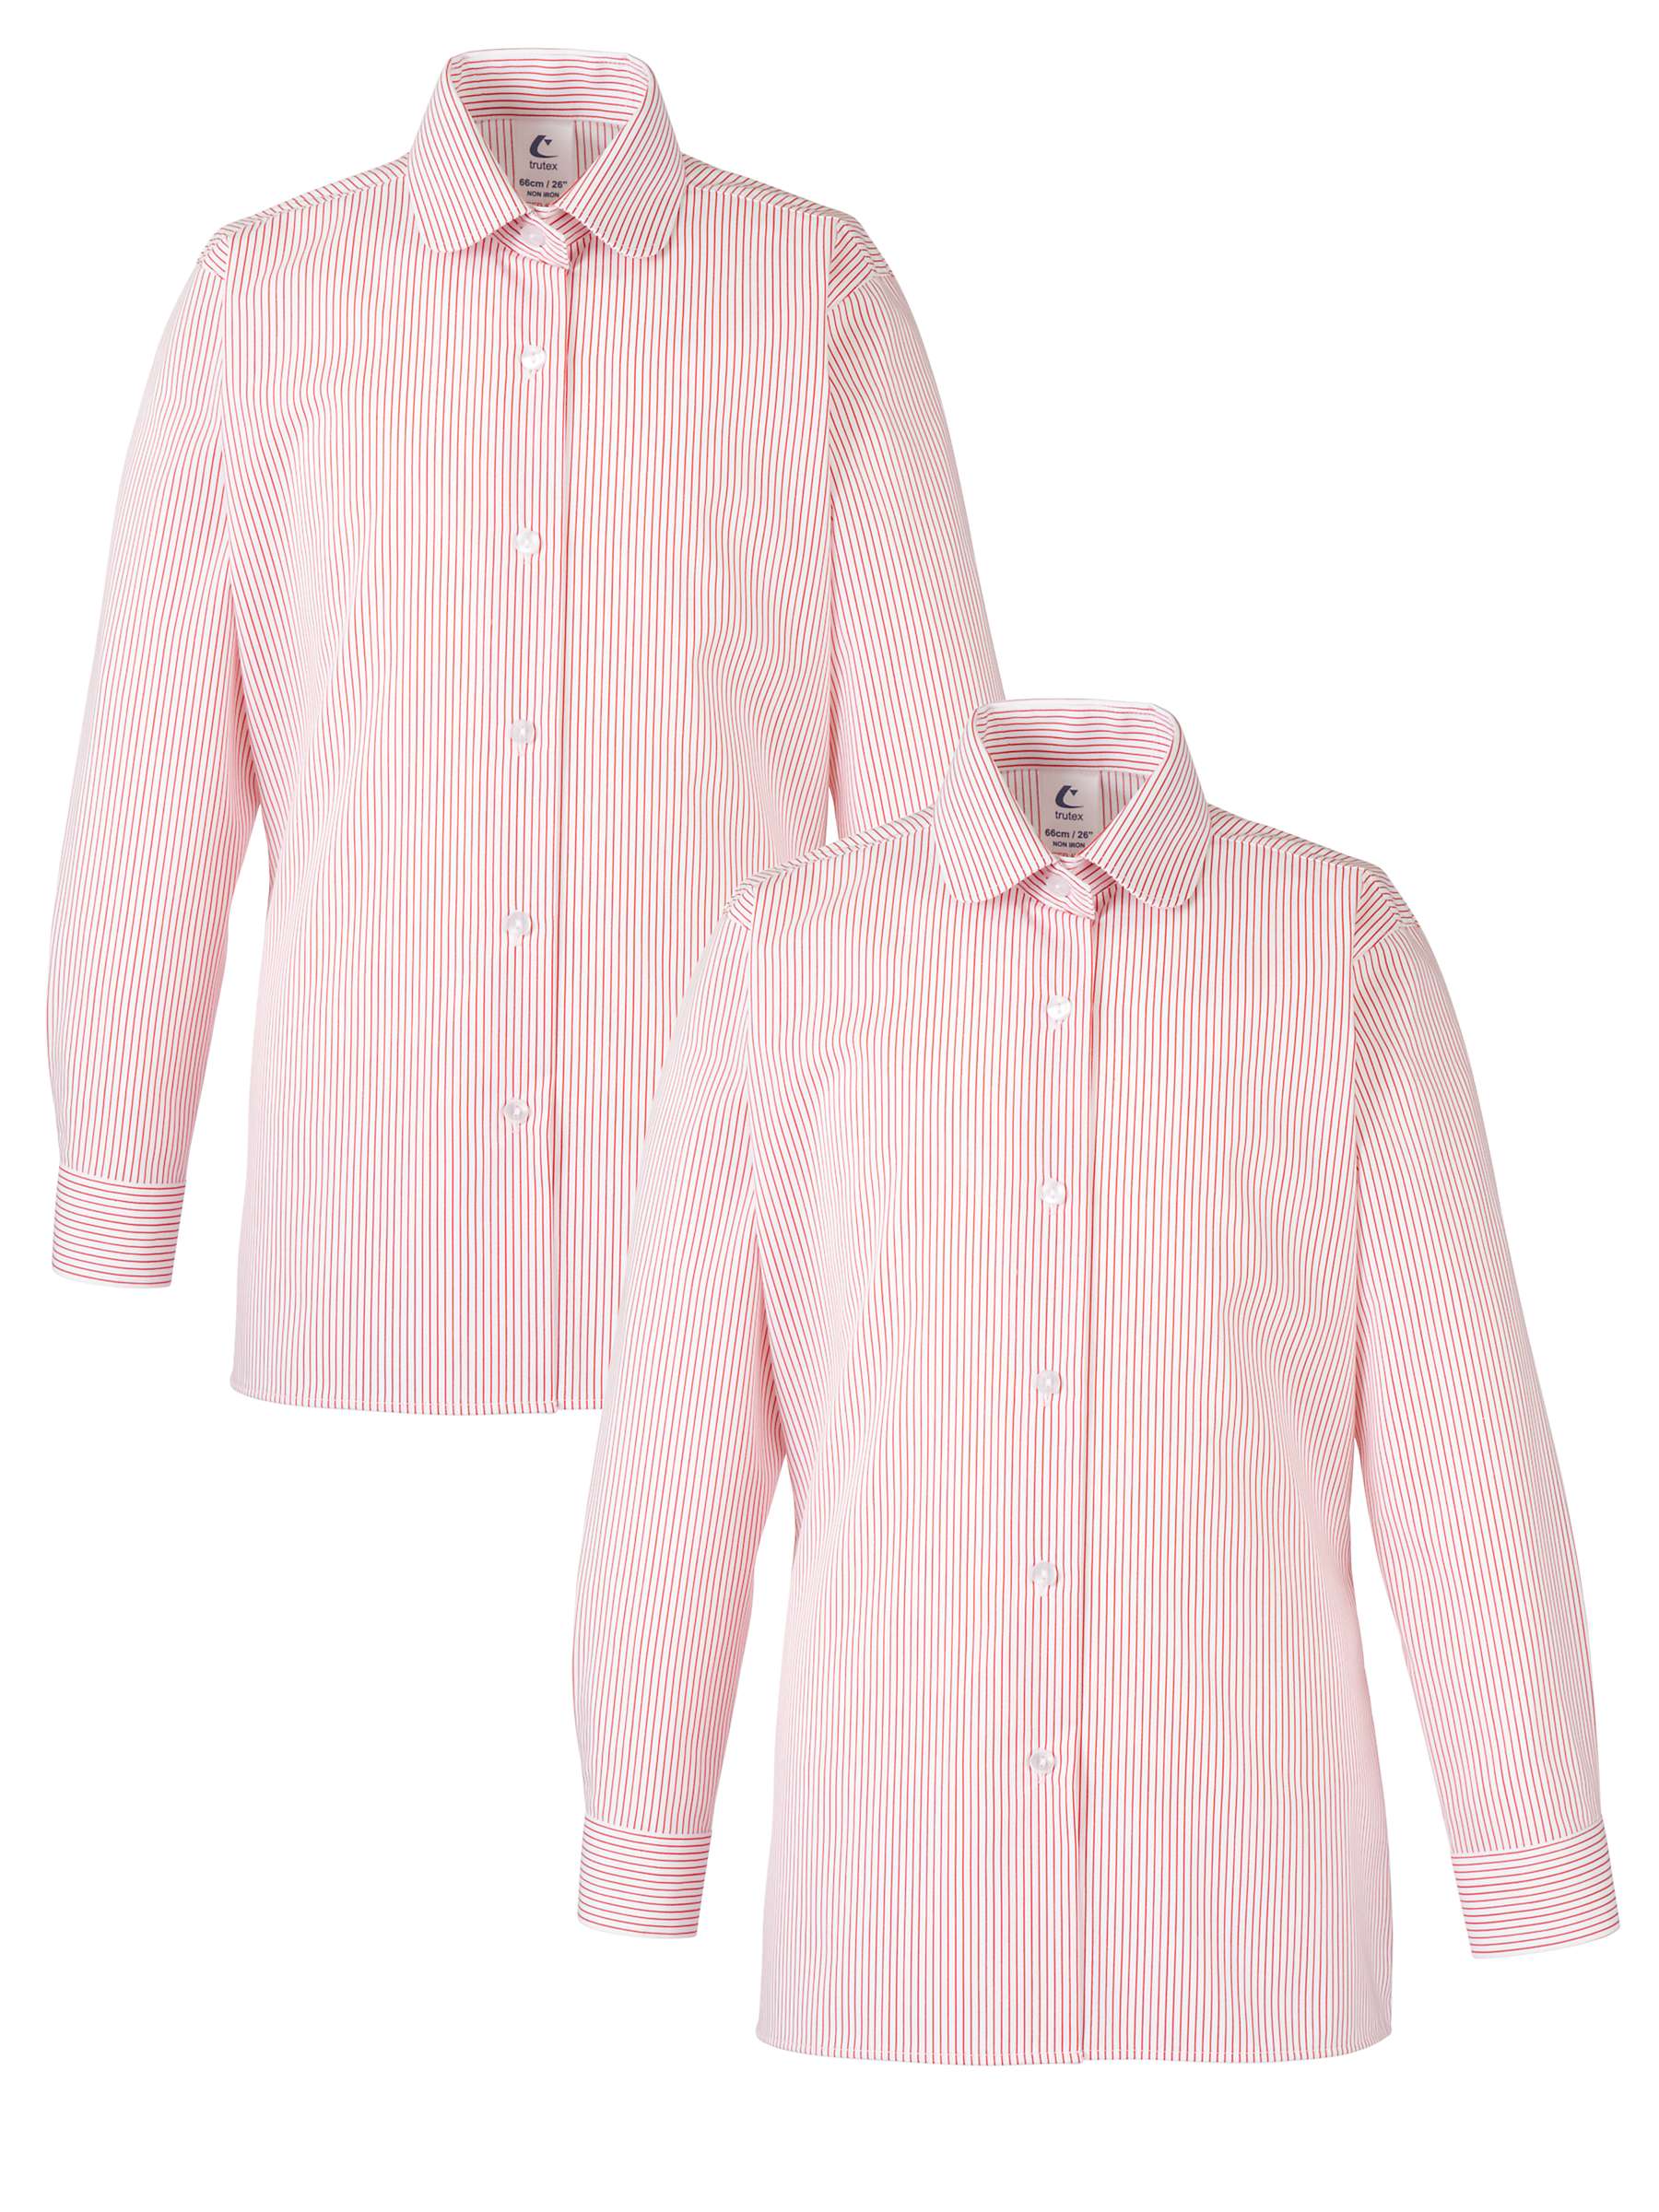 Buy Girls' School Long Sleeve Blouse, Pack of 2, Red/White Online at johnlewis.com